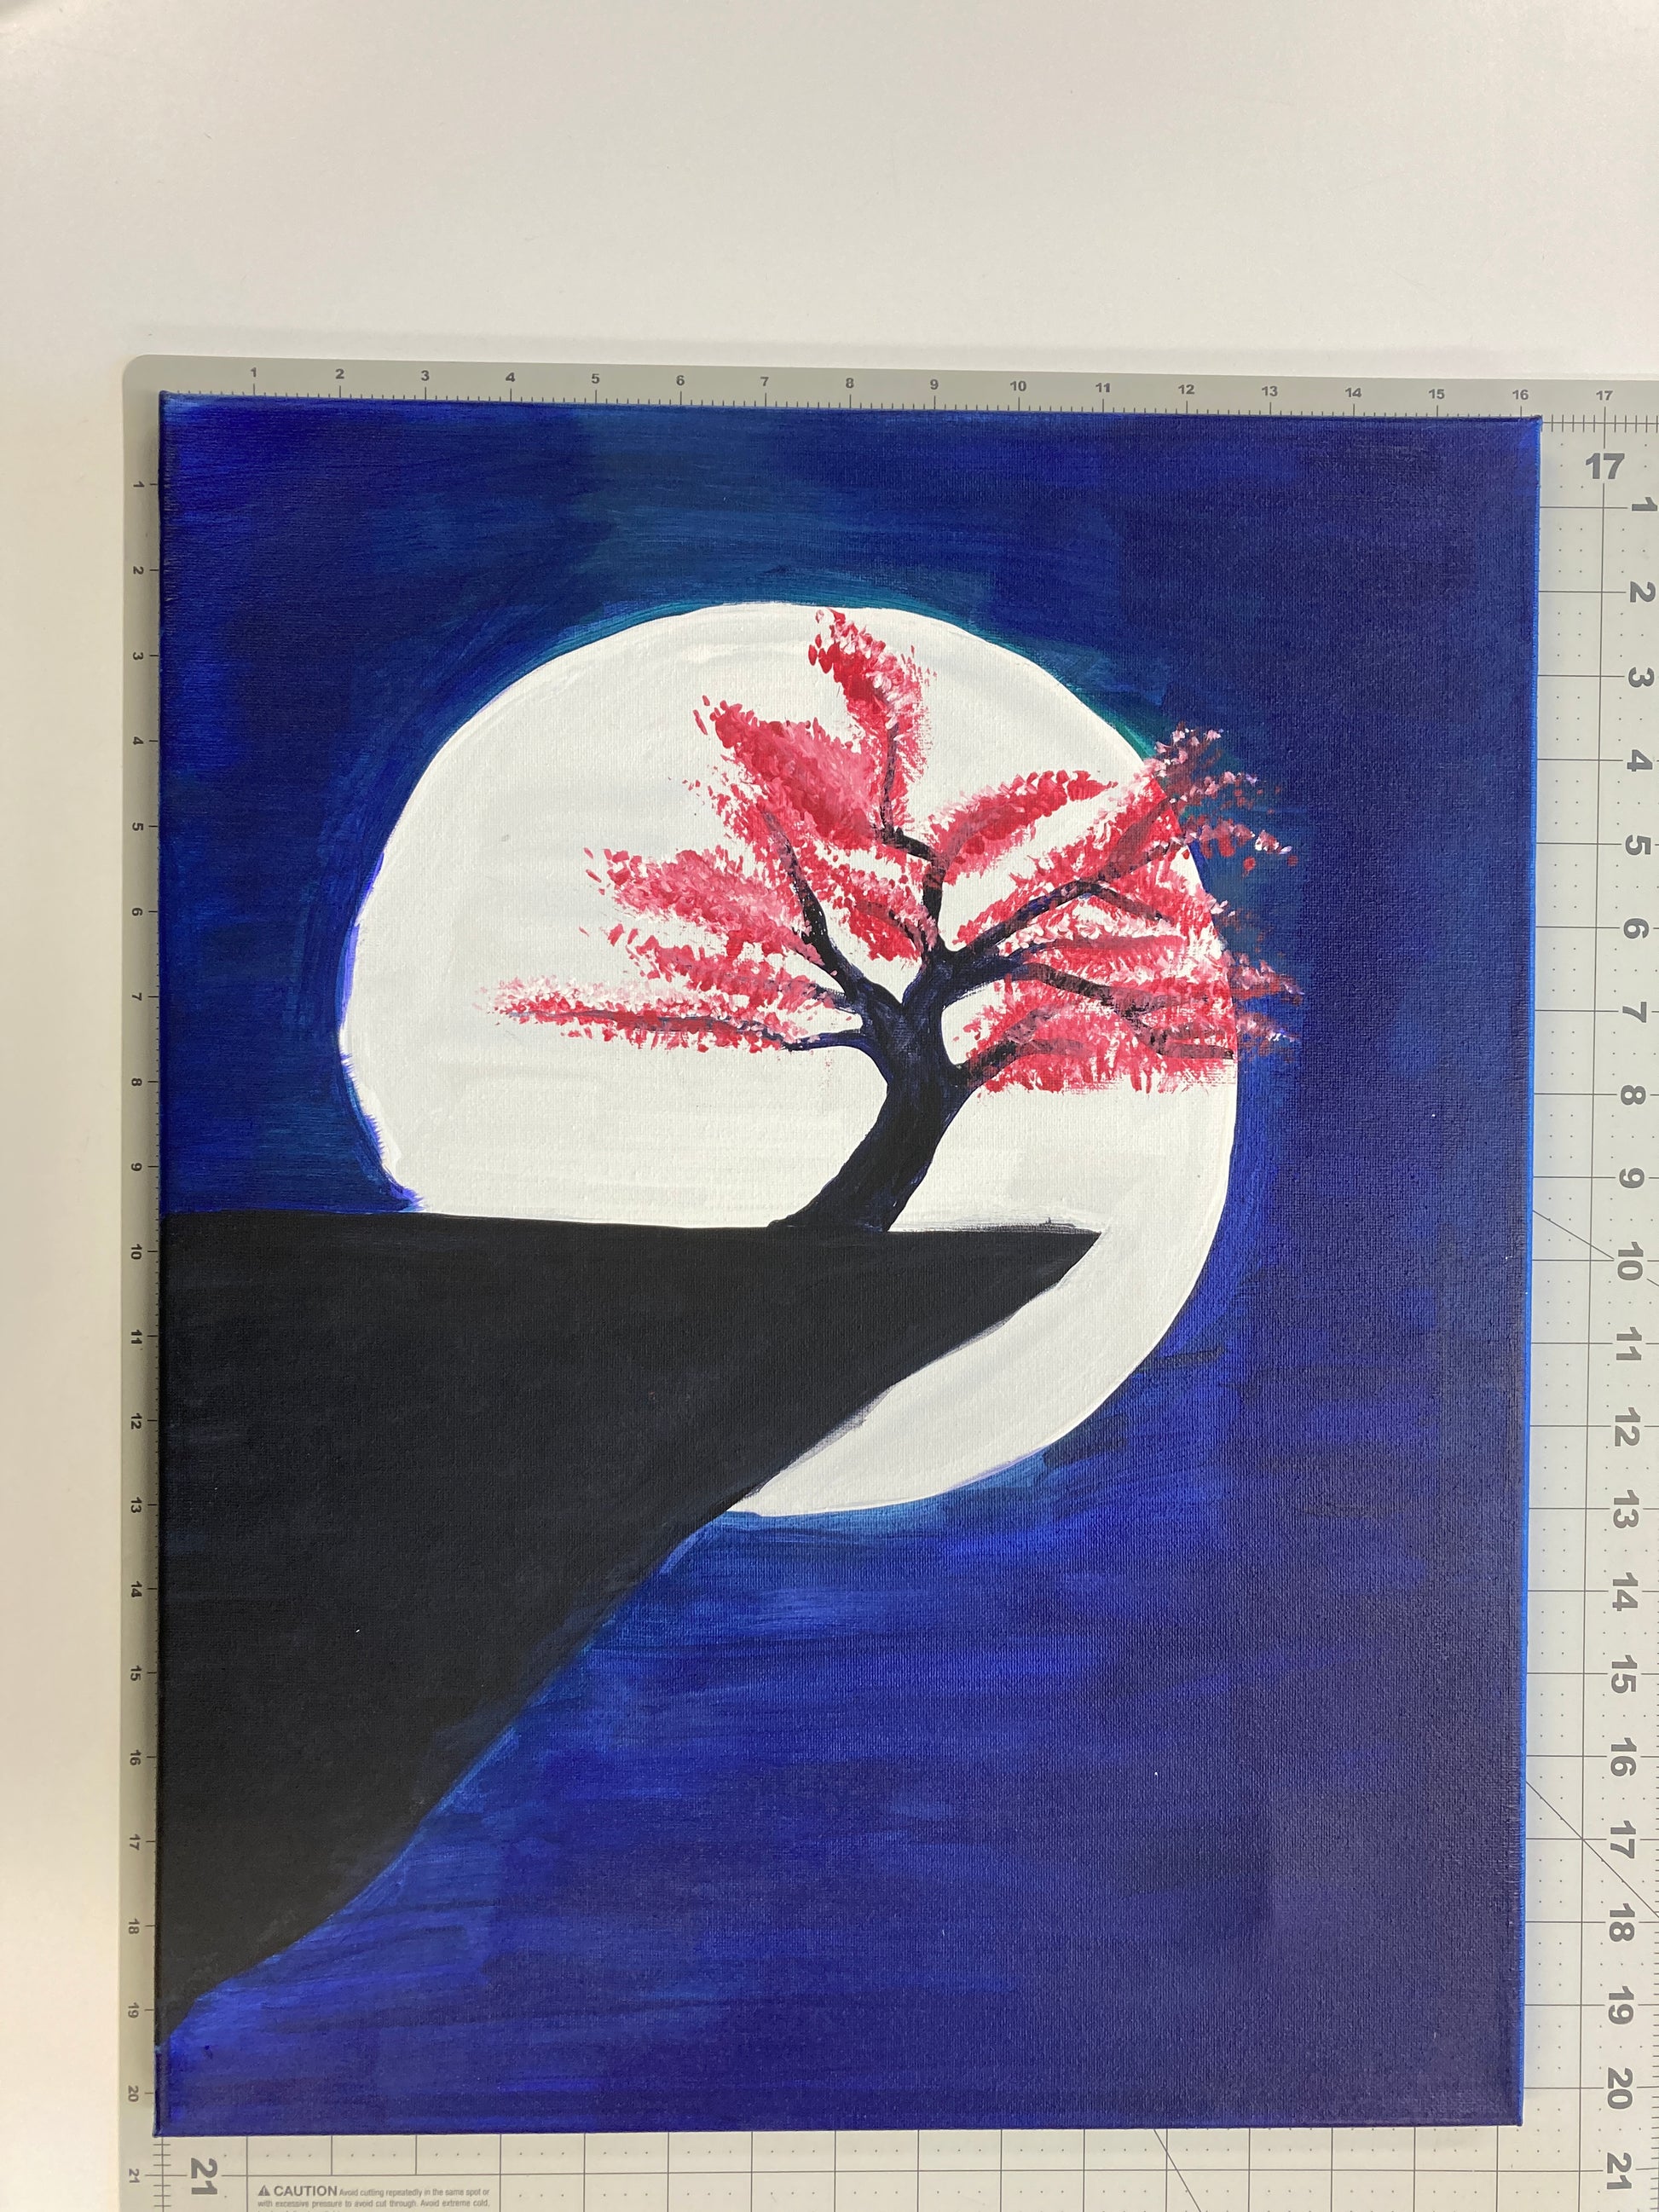 WATCH Resources Art Guild - Acrylic Paint on Stretched Canvas, 20 x 16 Original Fine Art, Moonlight Cherry Blossom made by Alec Lopez